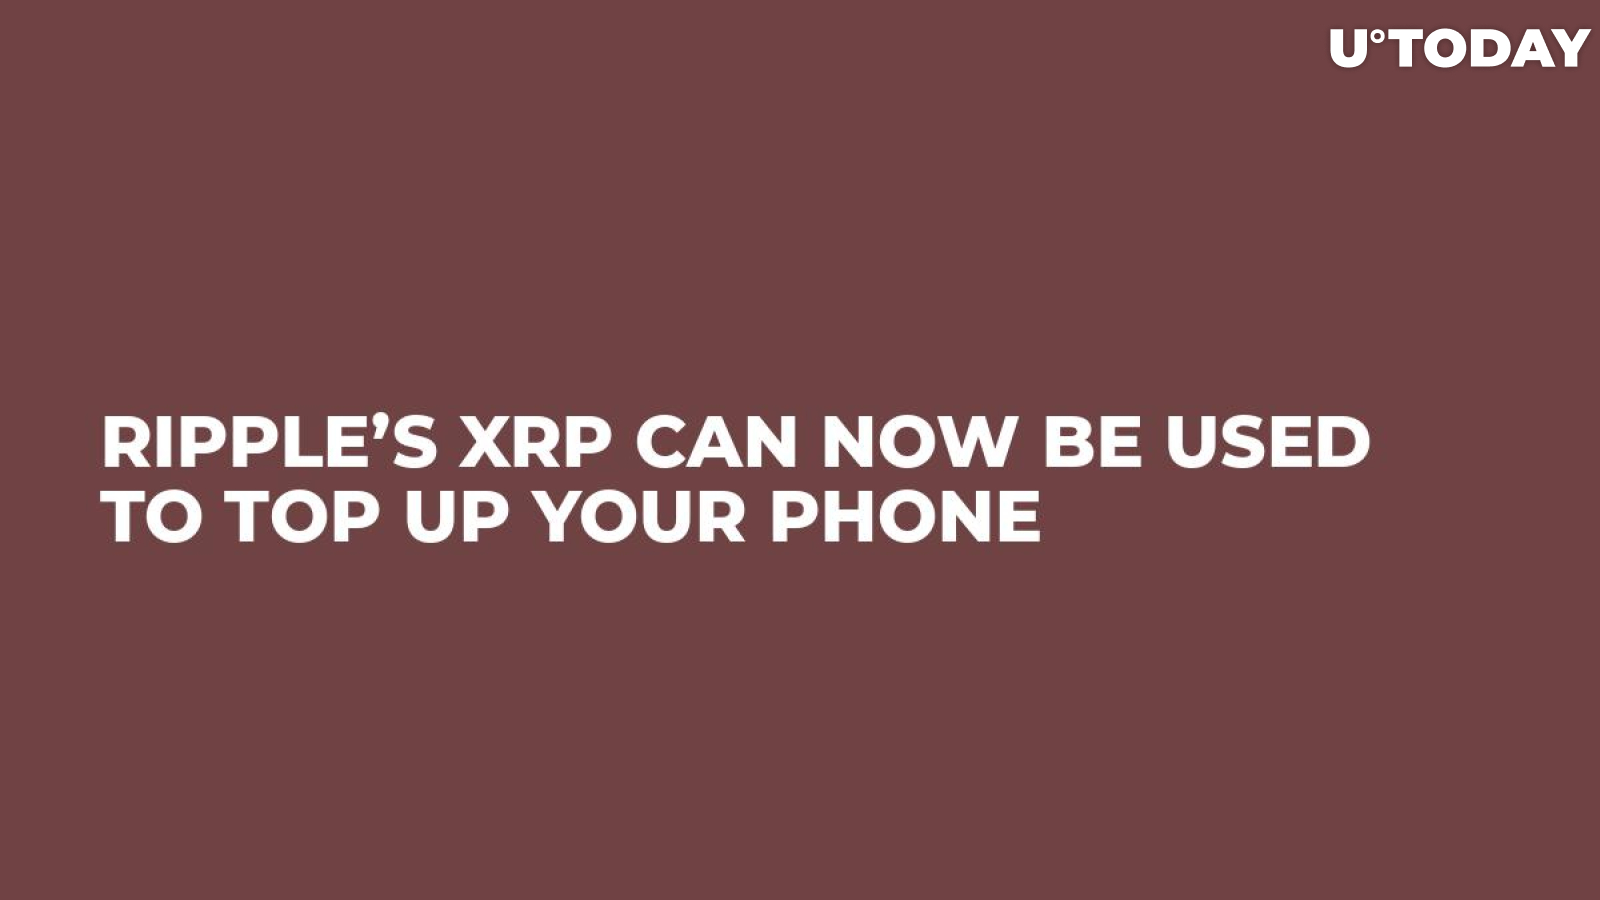 Ripple’s XRP Can Now Be Used to Top Up Your Phone